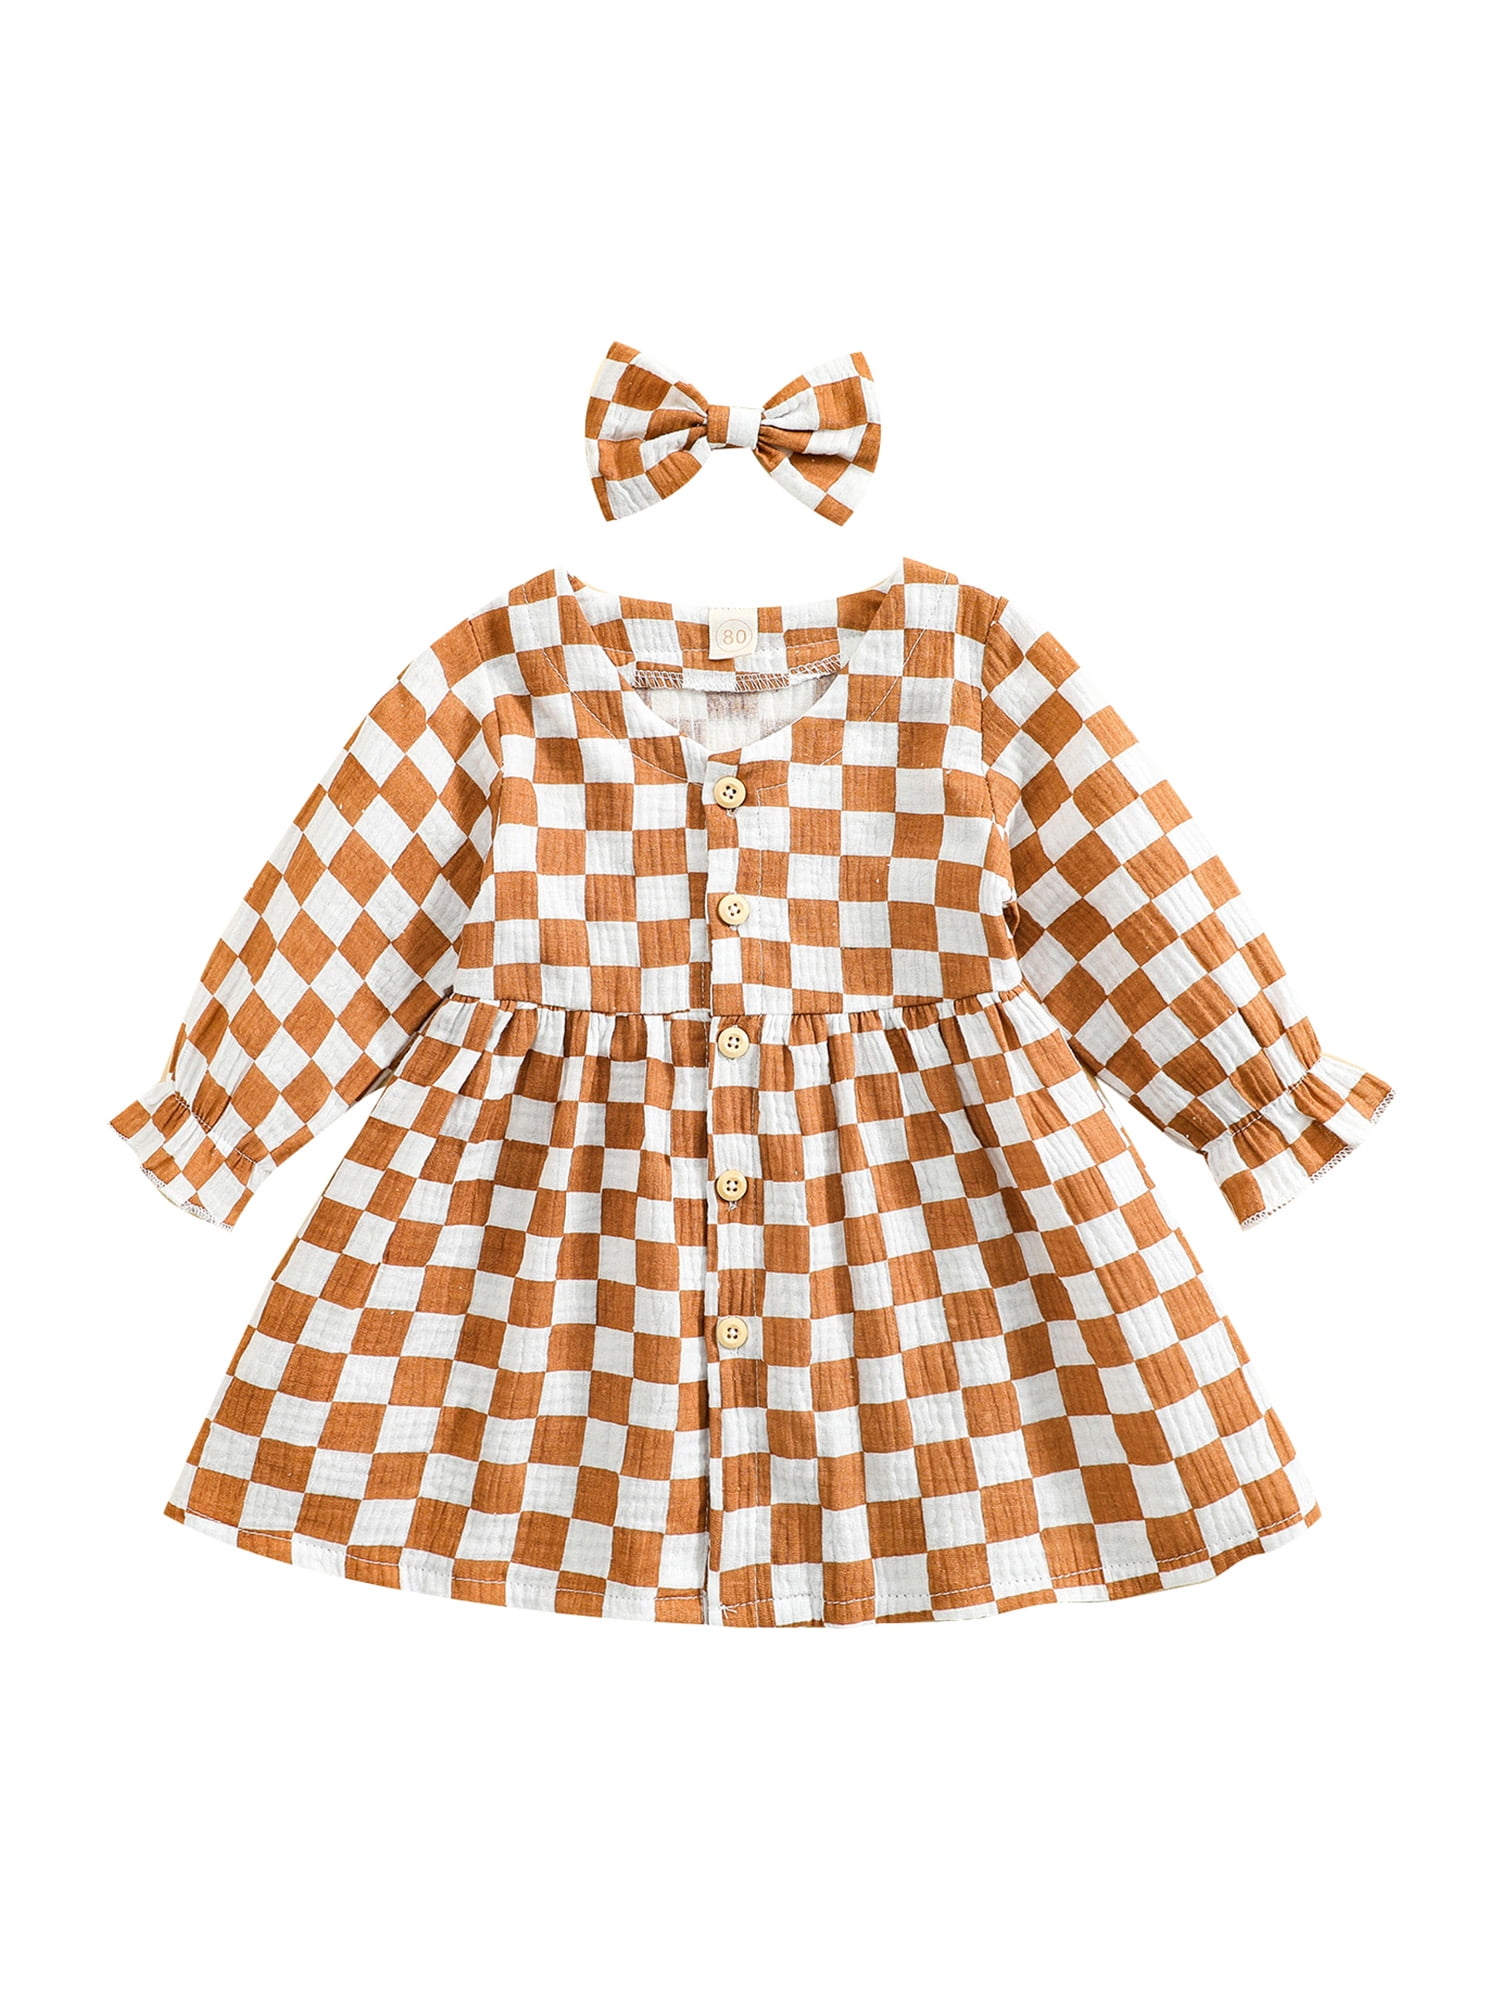 Wassery Spring Fall Toddlers Baby Girls Dress Plaid Round Collar  Single-breasted Long Sleeve Princess Skirt + Bow Hairpin 